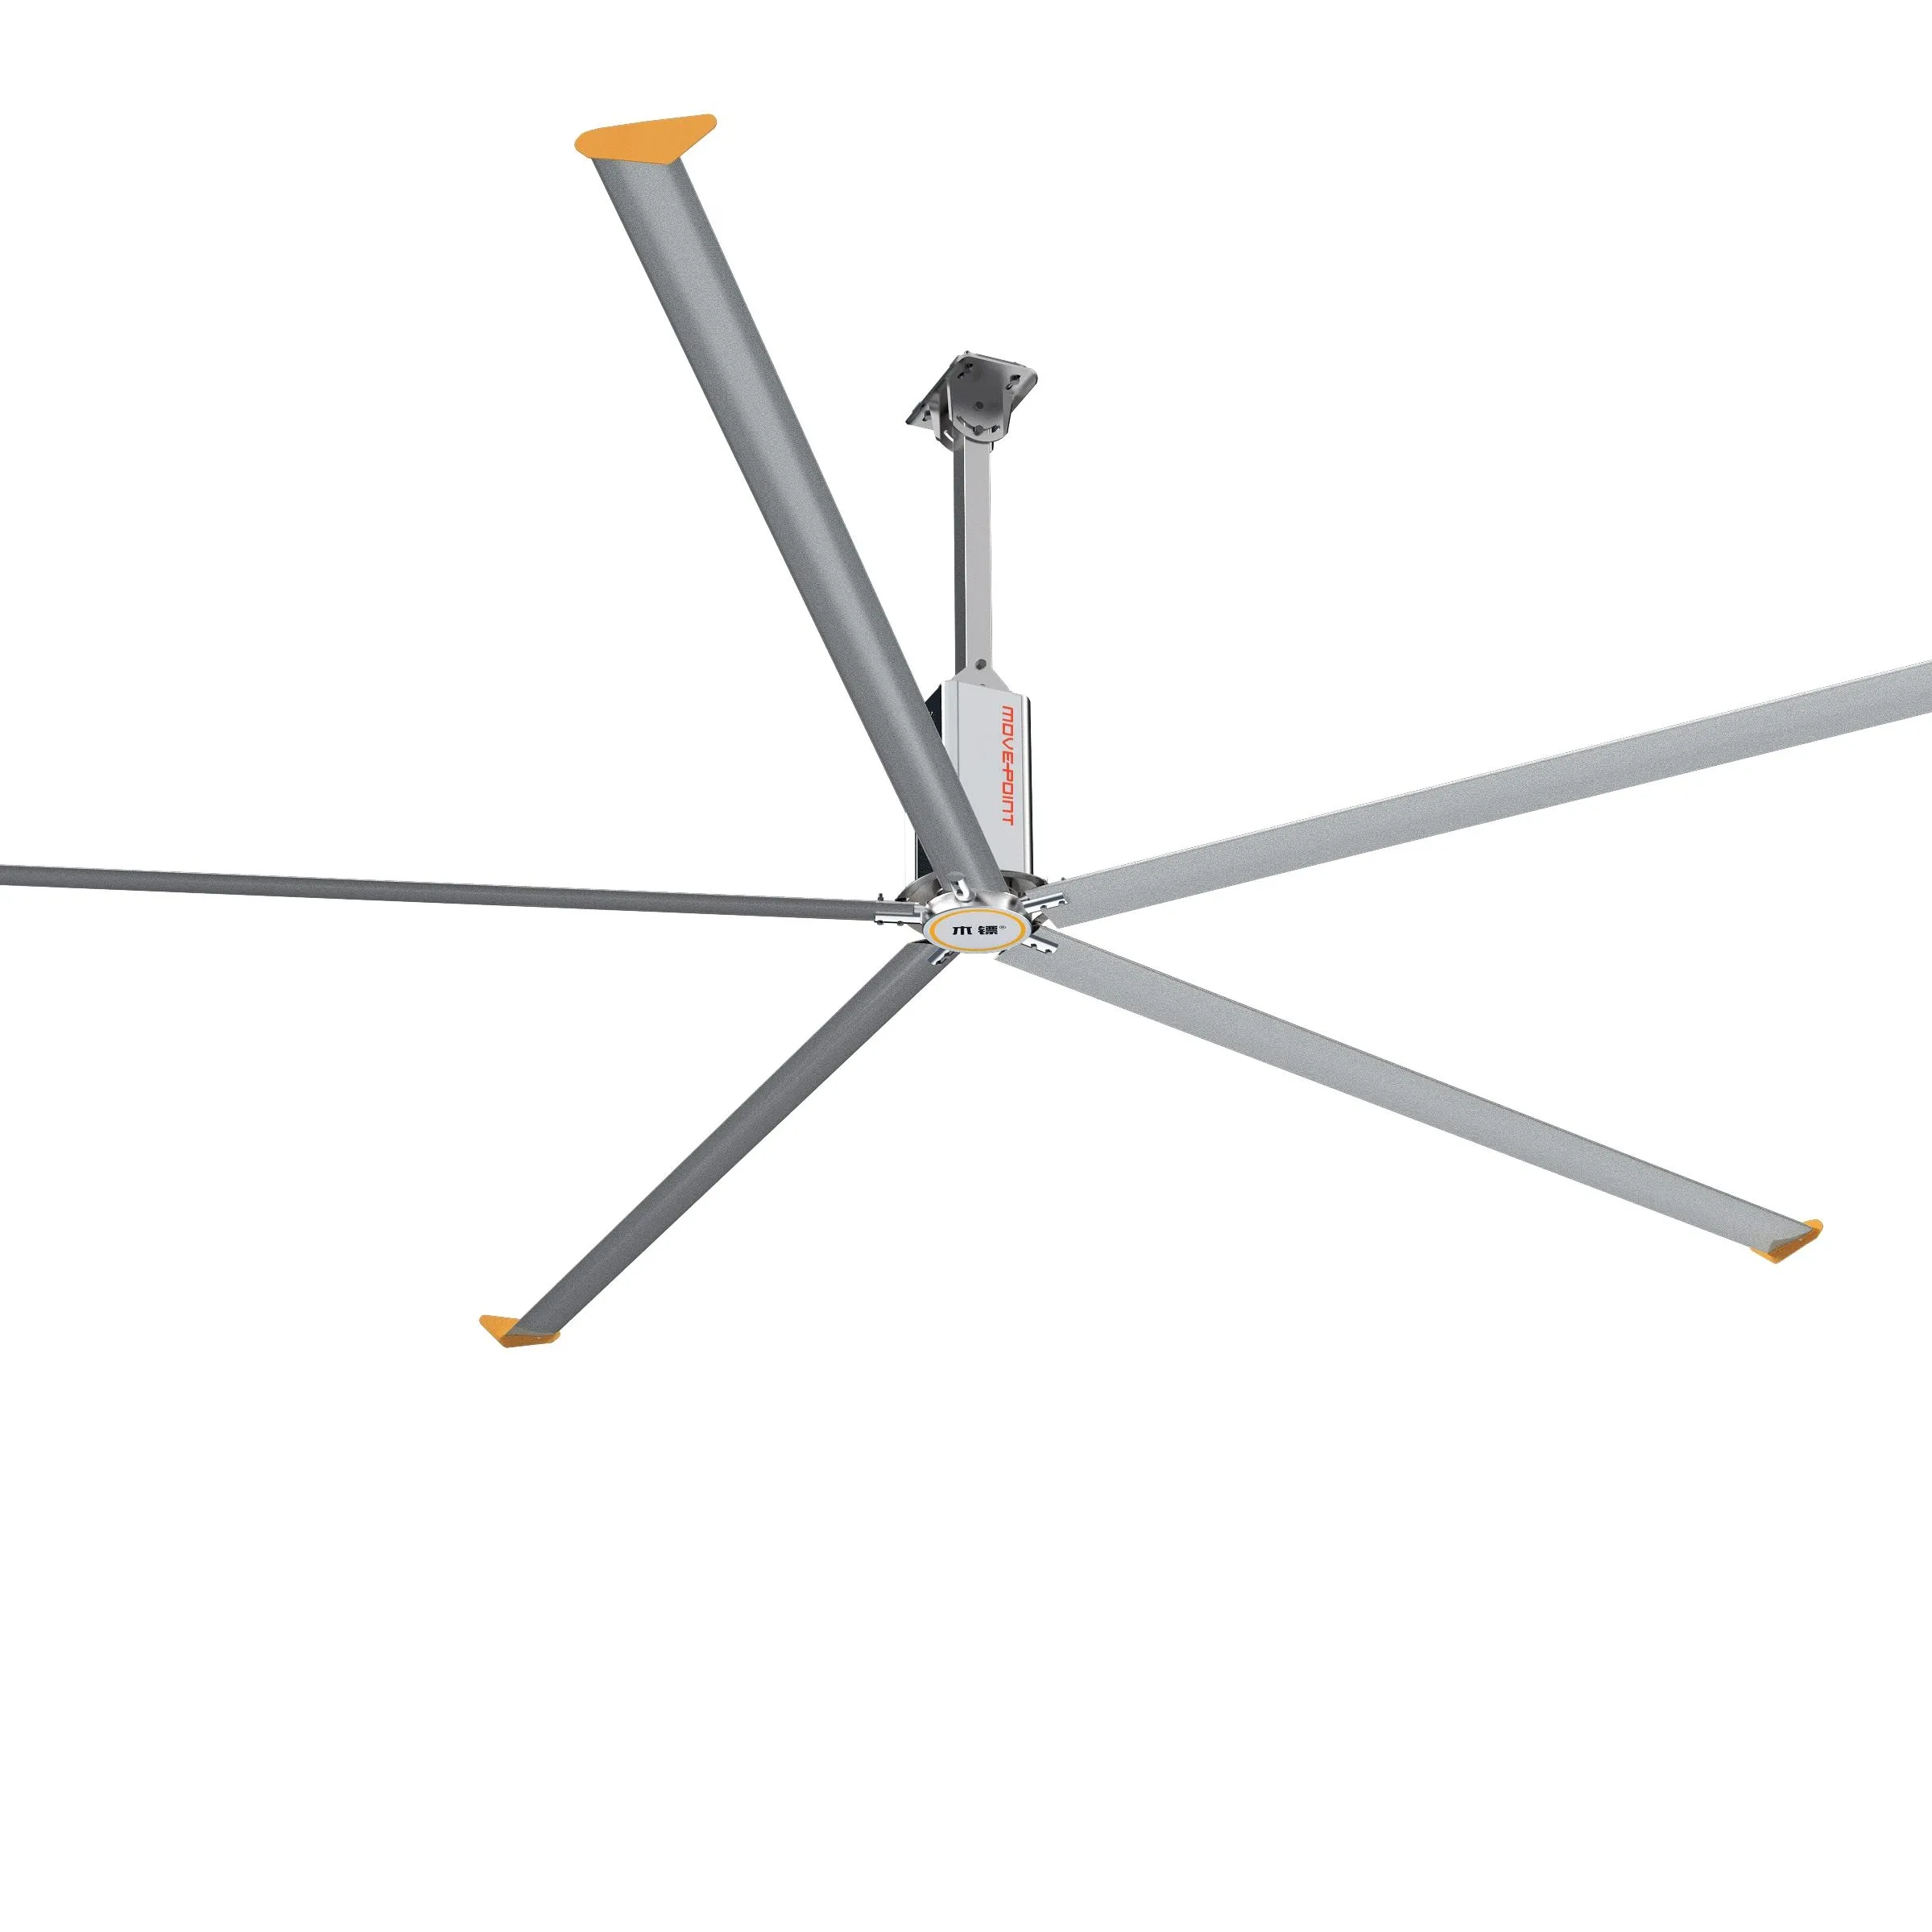 MPFANS 3 Years Warranty Big Wind Ceiling Fan Large Spaces Giant Industrial Hvls Fans For Sale